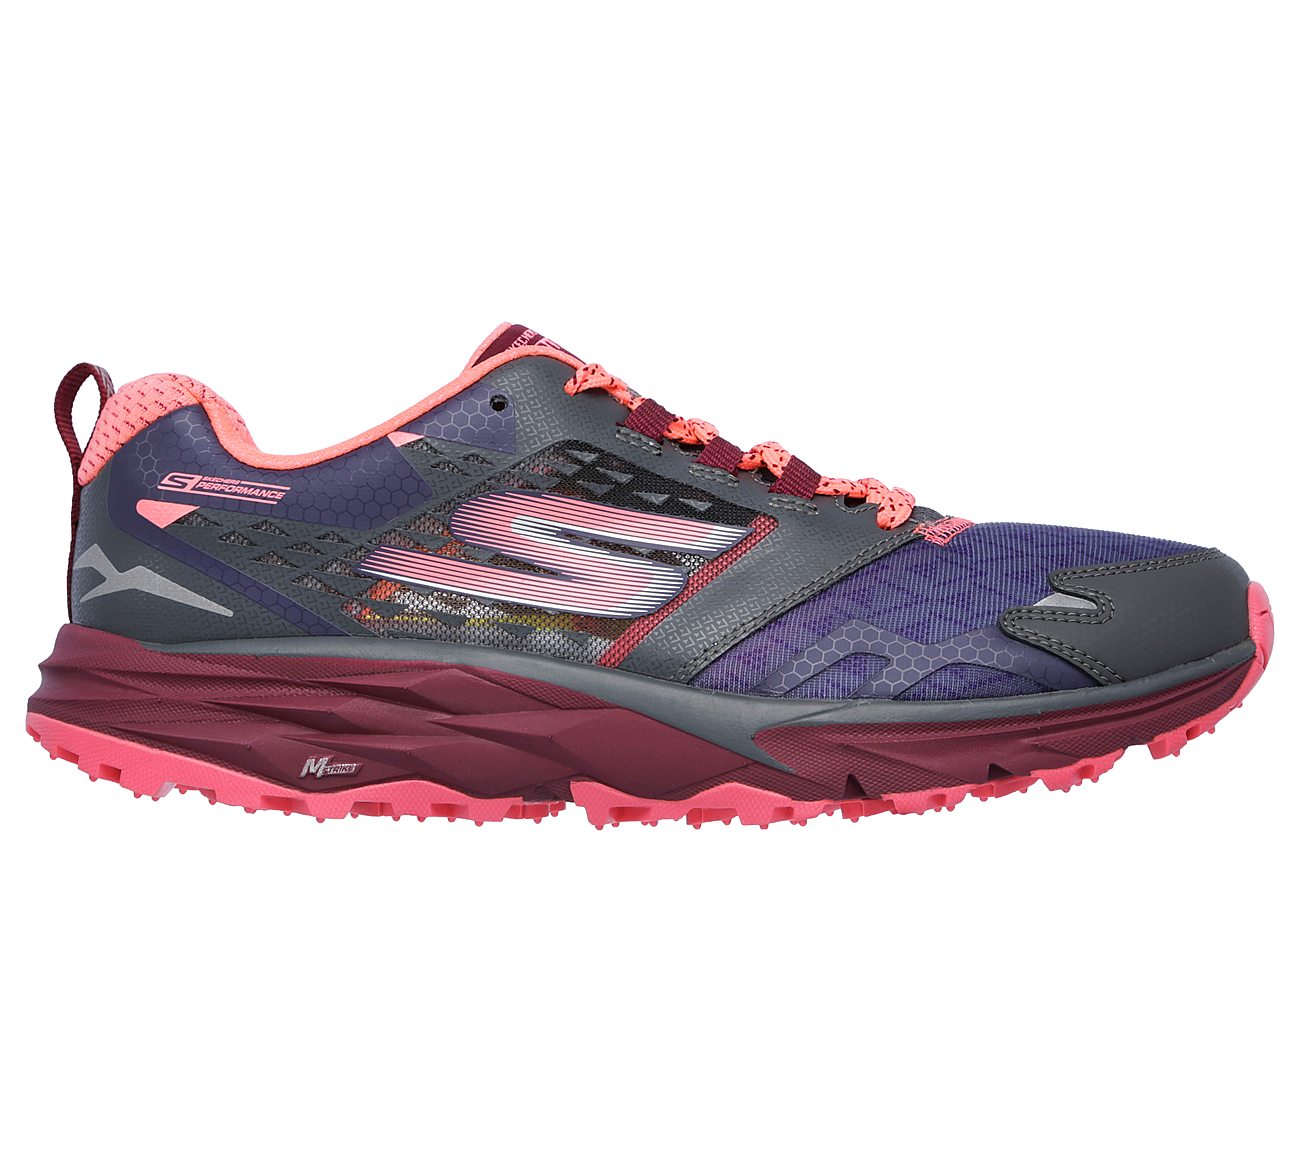 skechers go trail running shoes